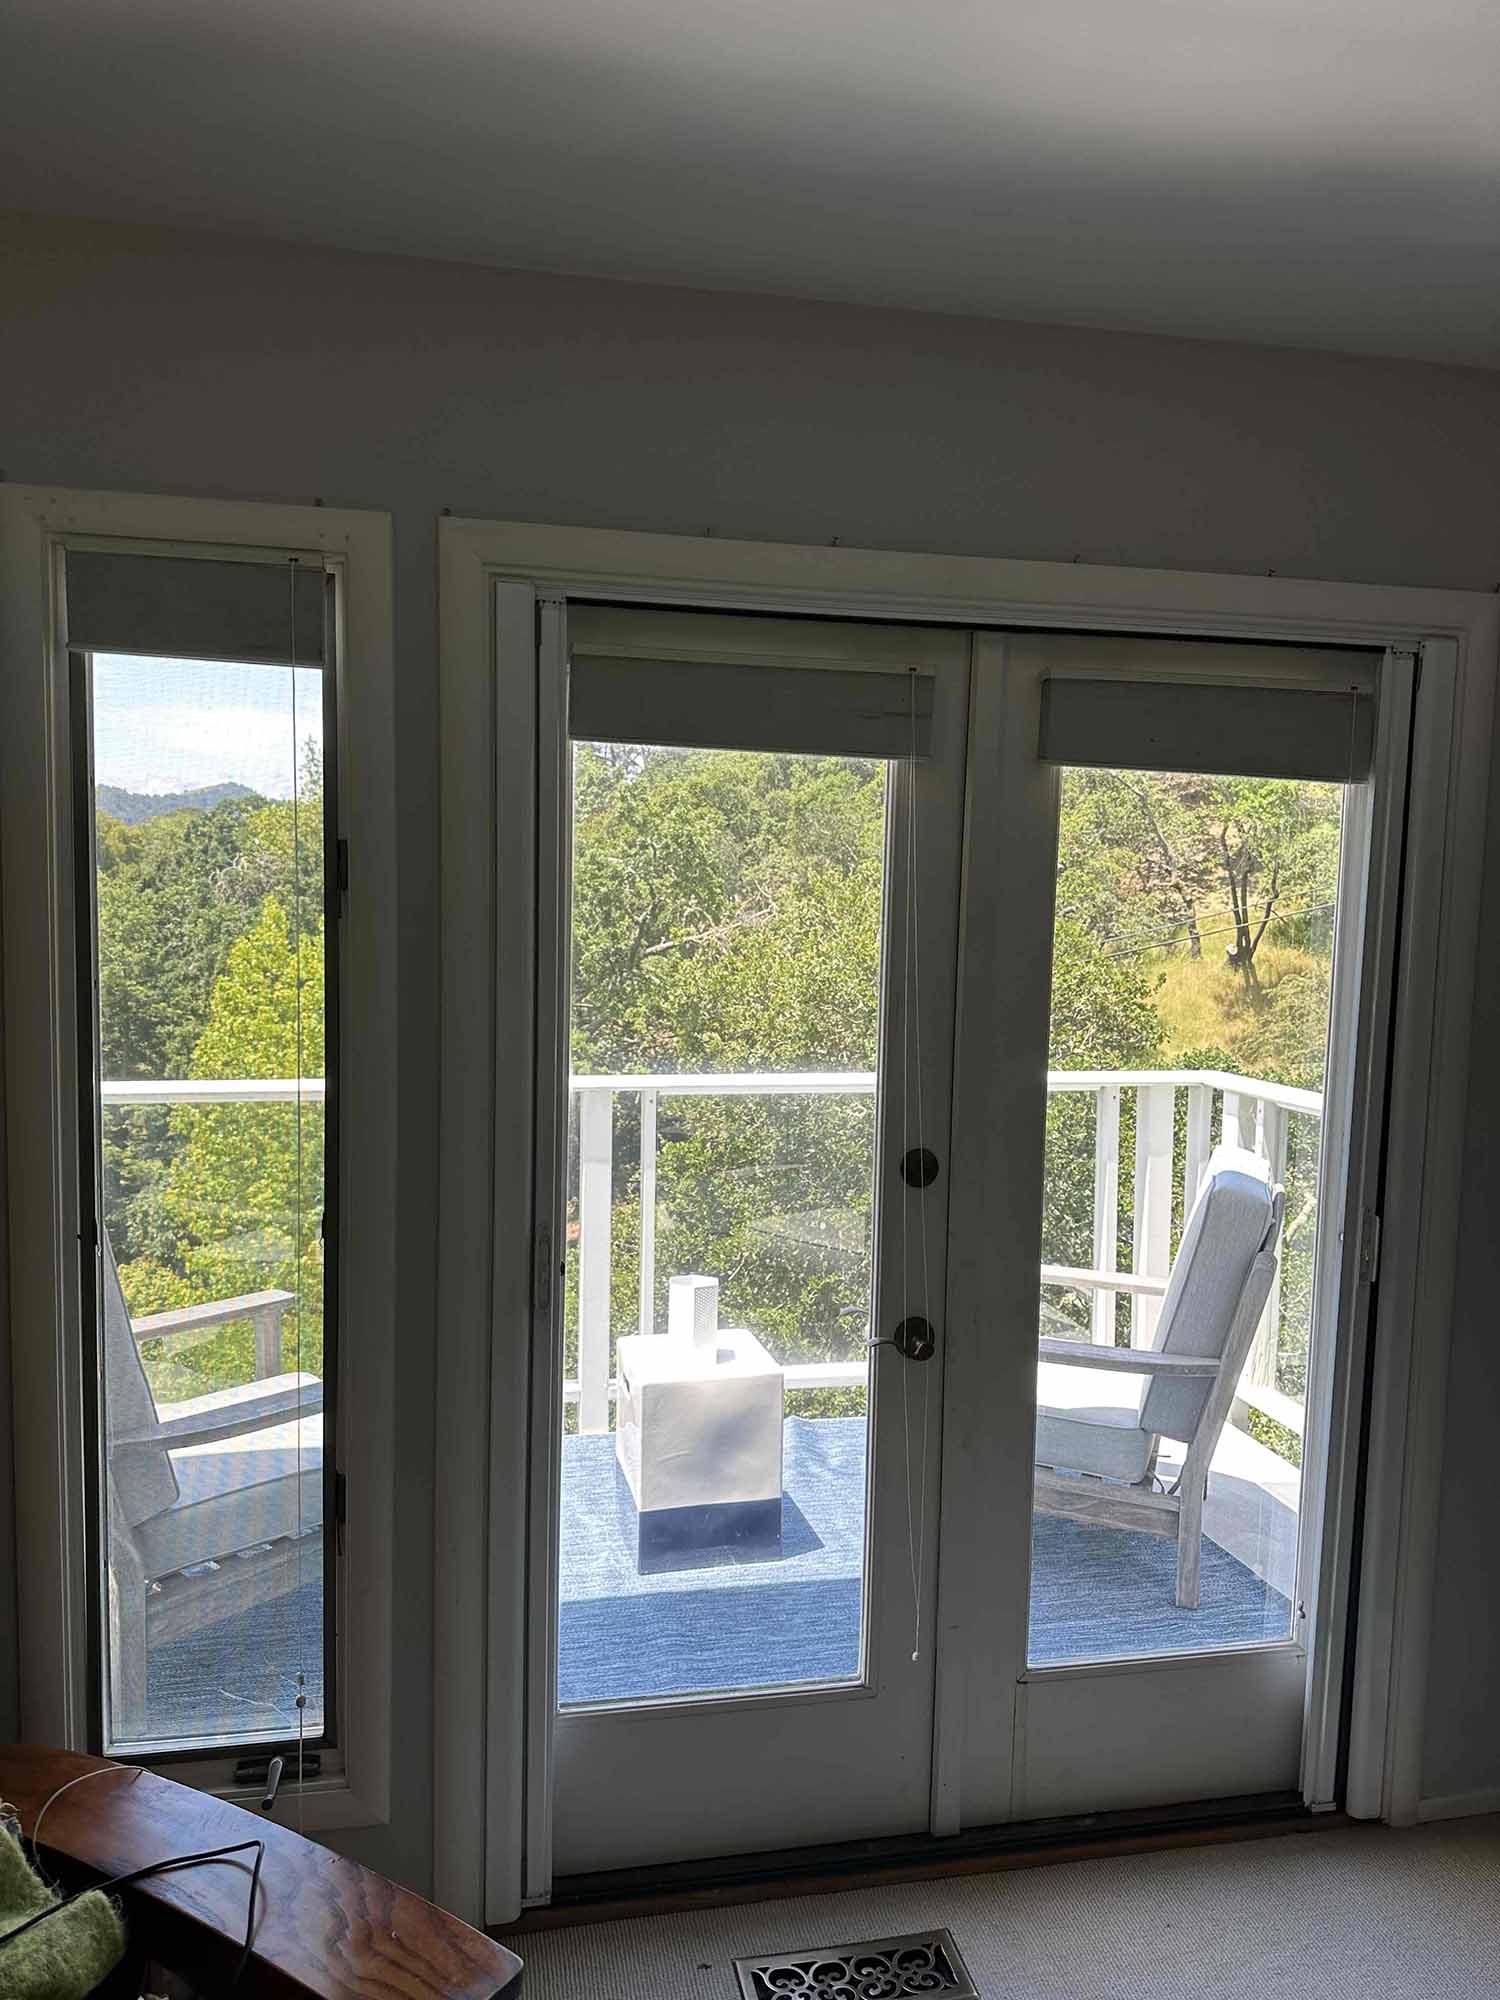 Sun Control Window Film for Greenbrae Homes, Installed by ClimatePro.